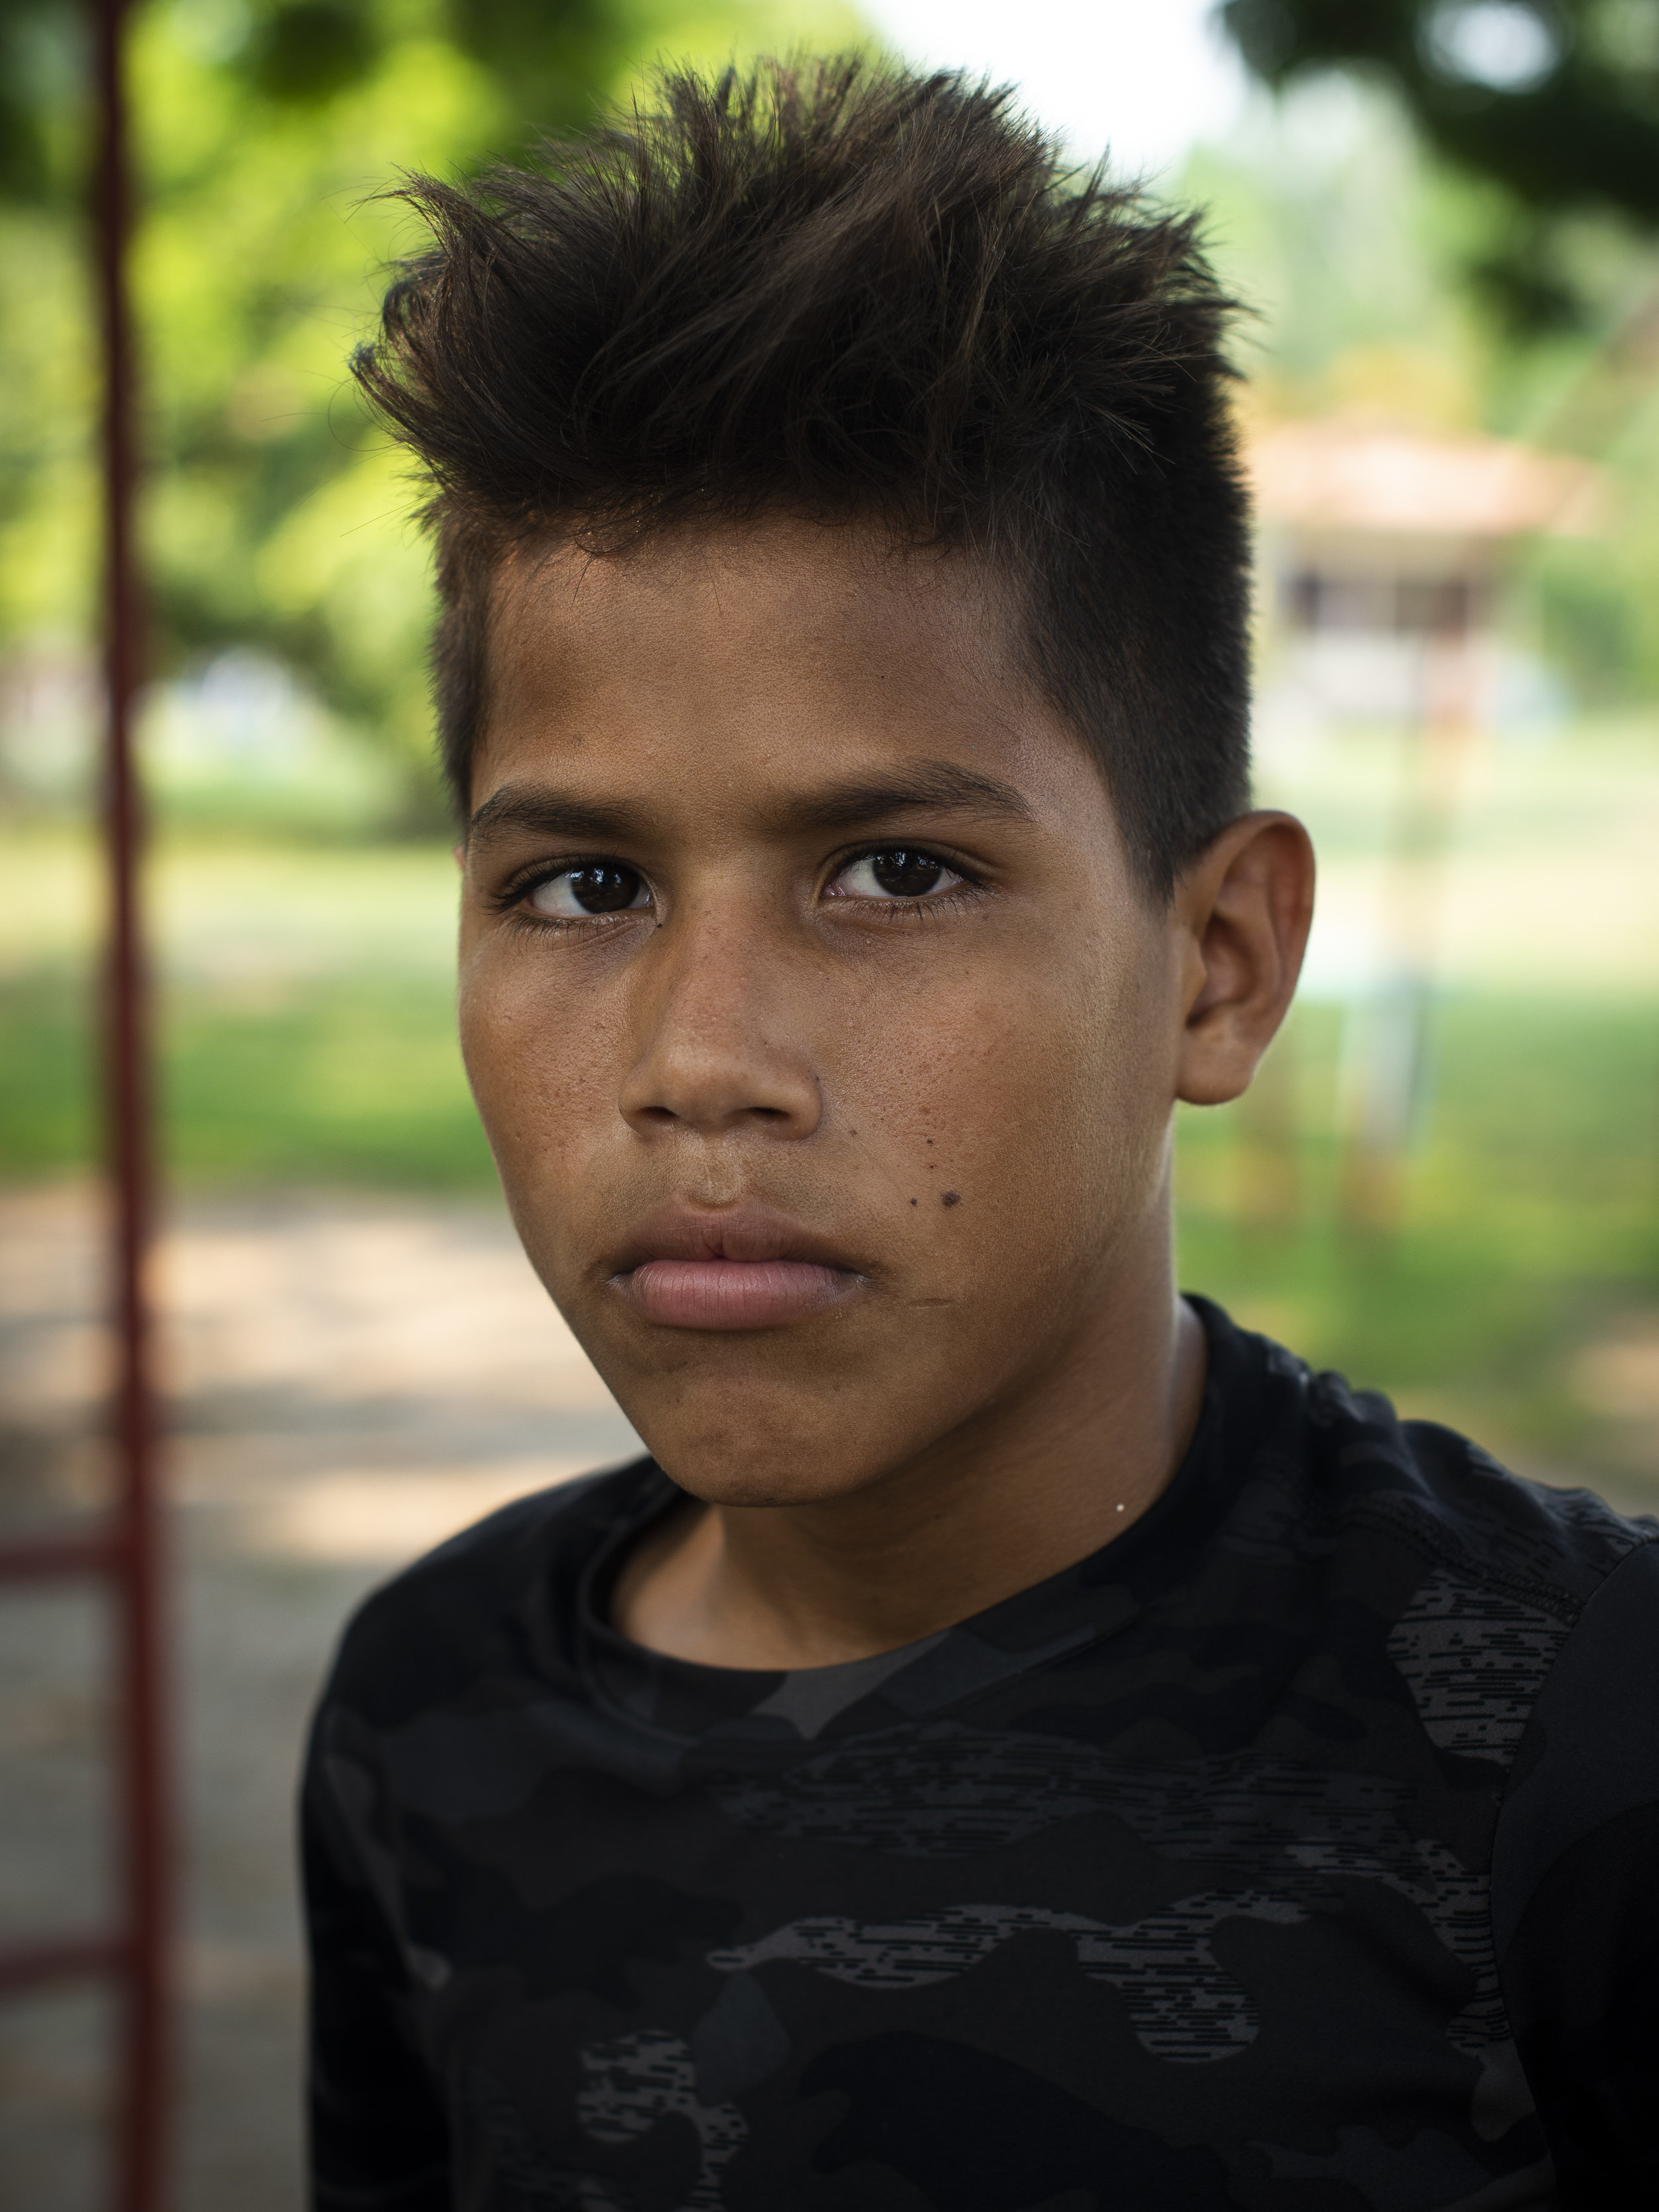  Children as young as 6 are groomed for gang activity. They are given small assignments such as running errands or being lookouts. Mauricio was a member of MS-13 at age 10. Now 13, he has been given the rare opportunity to escape gang life by living 